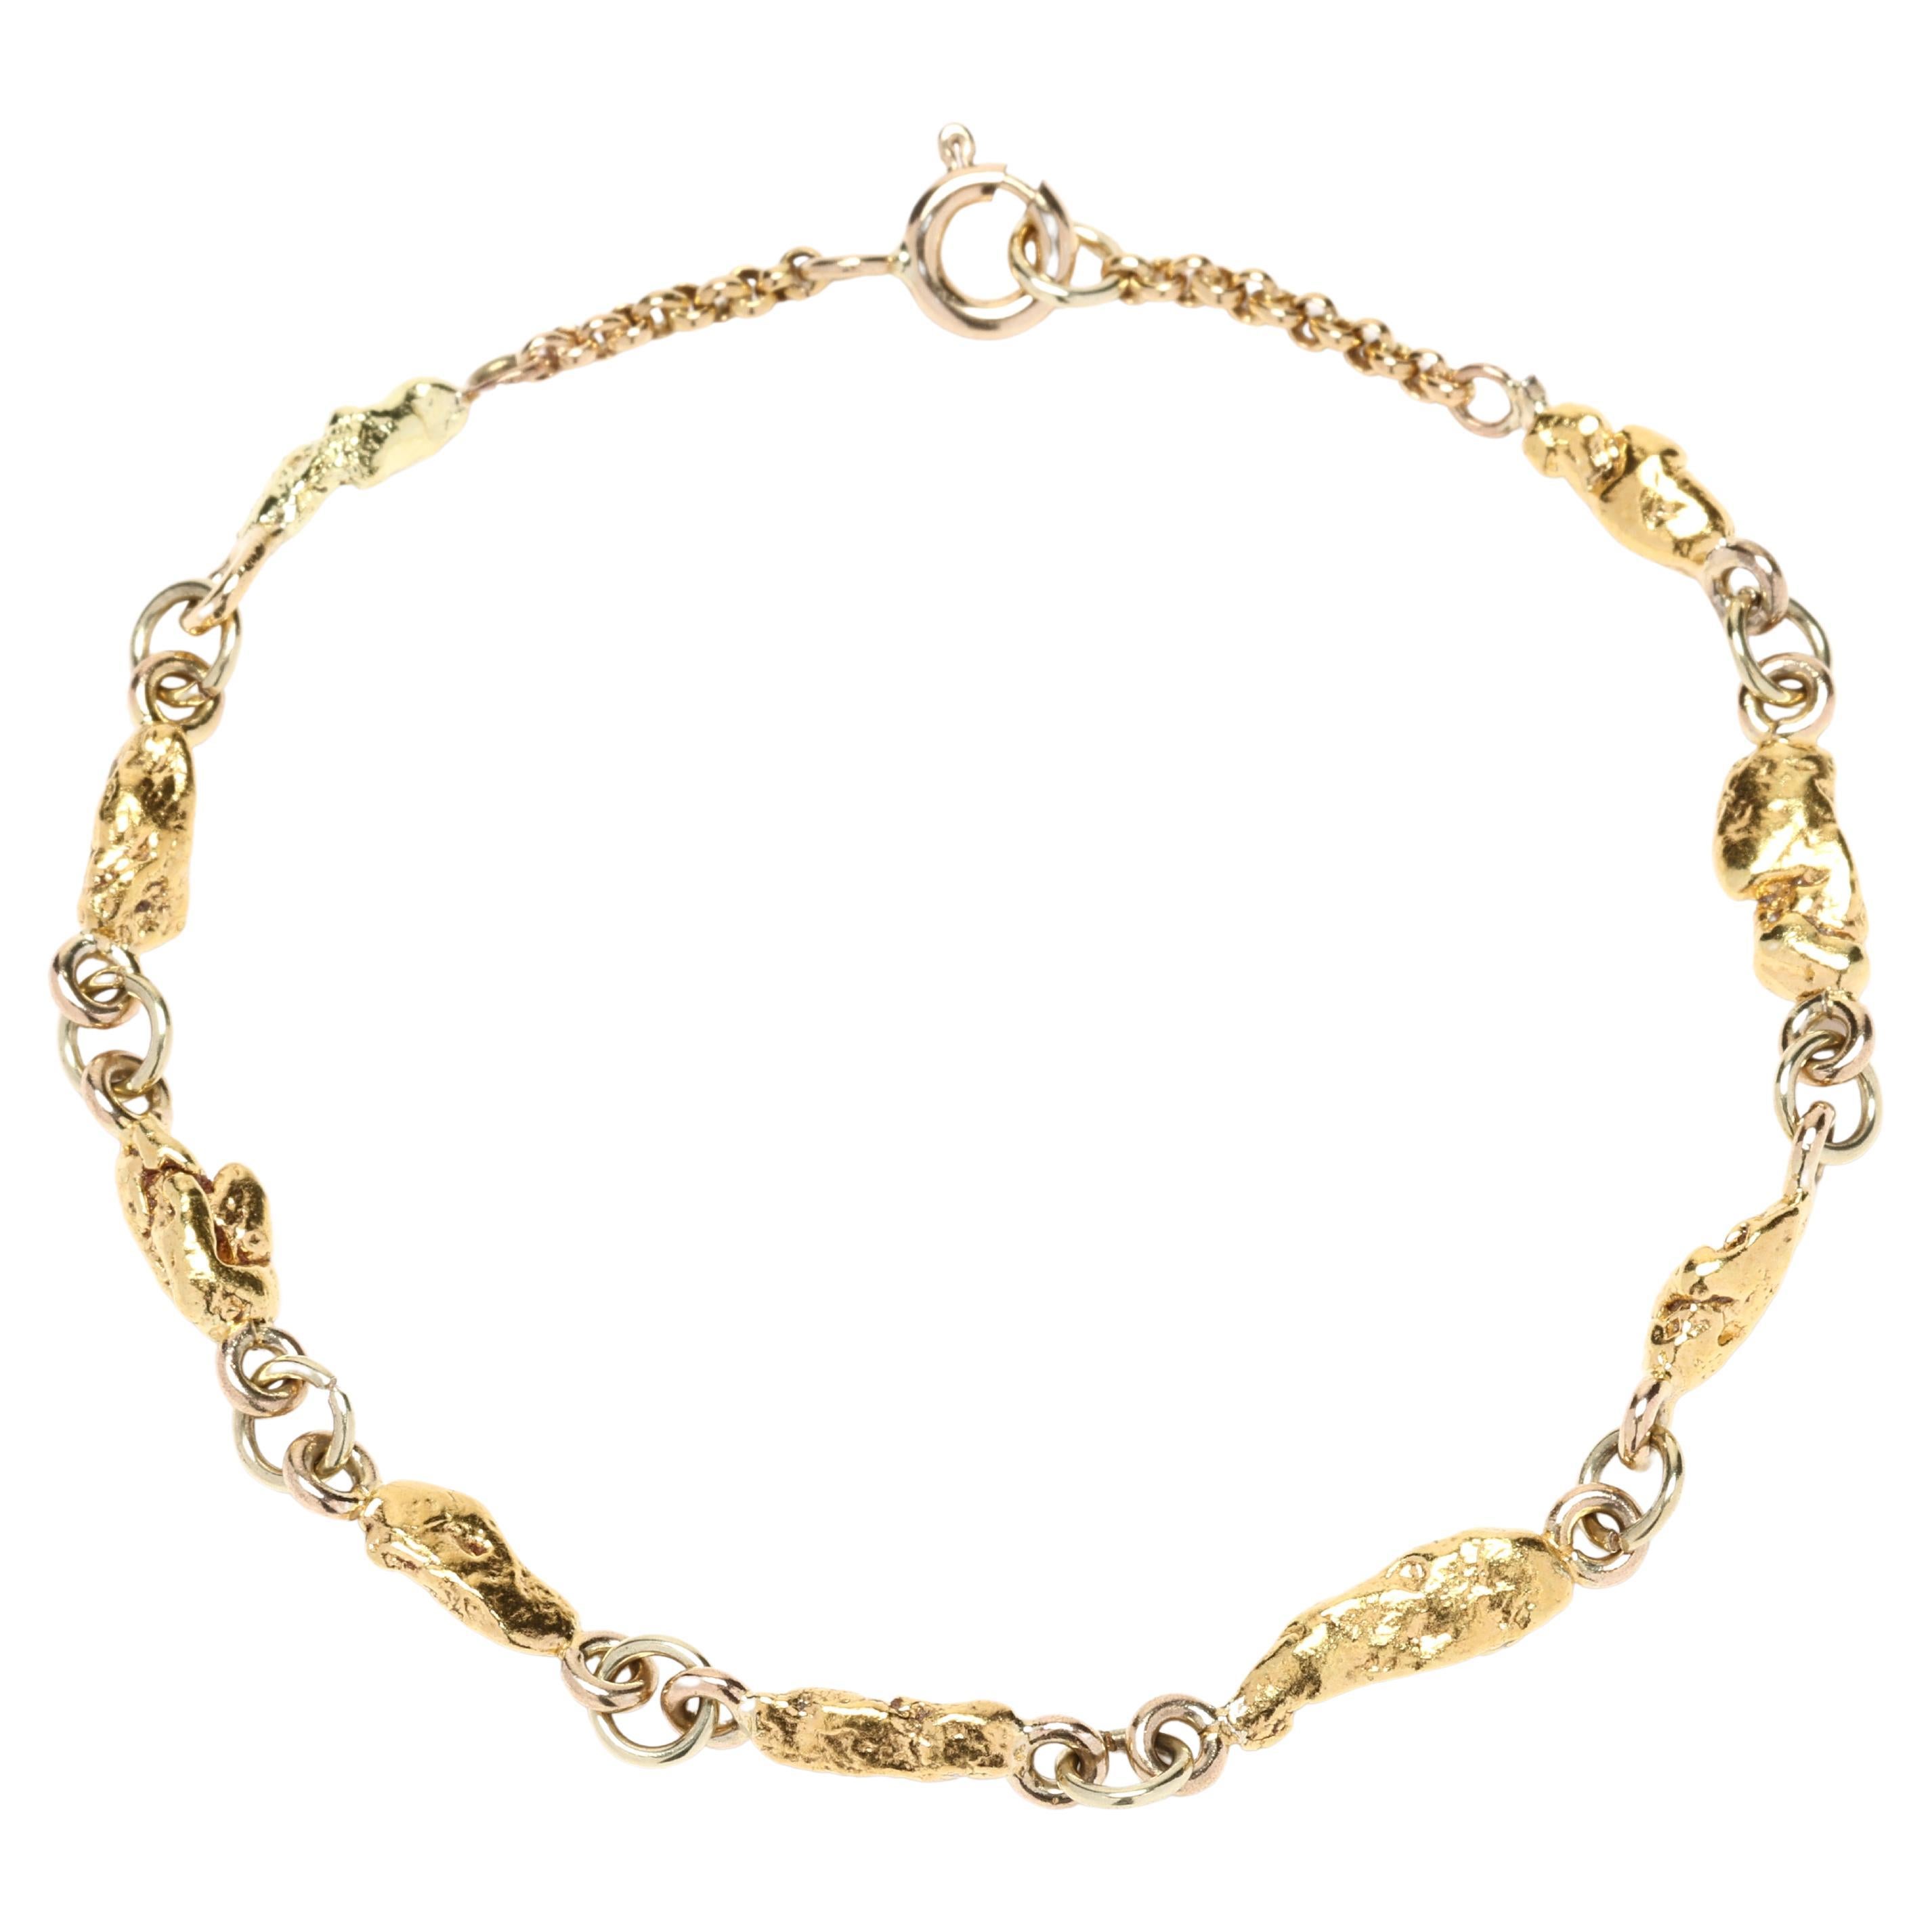 22k Gold Nugget Bracelet, 18k Yellow Gold Chain, Length 7 Inches, Stackable For Sale